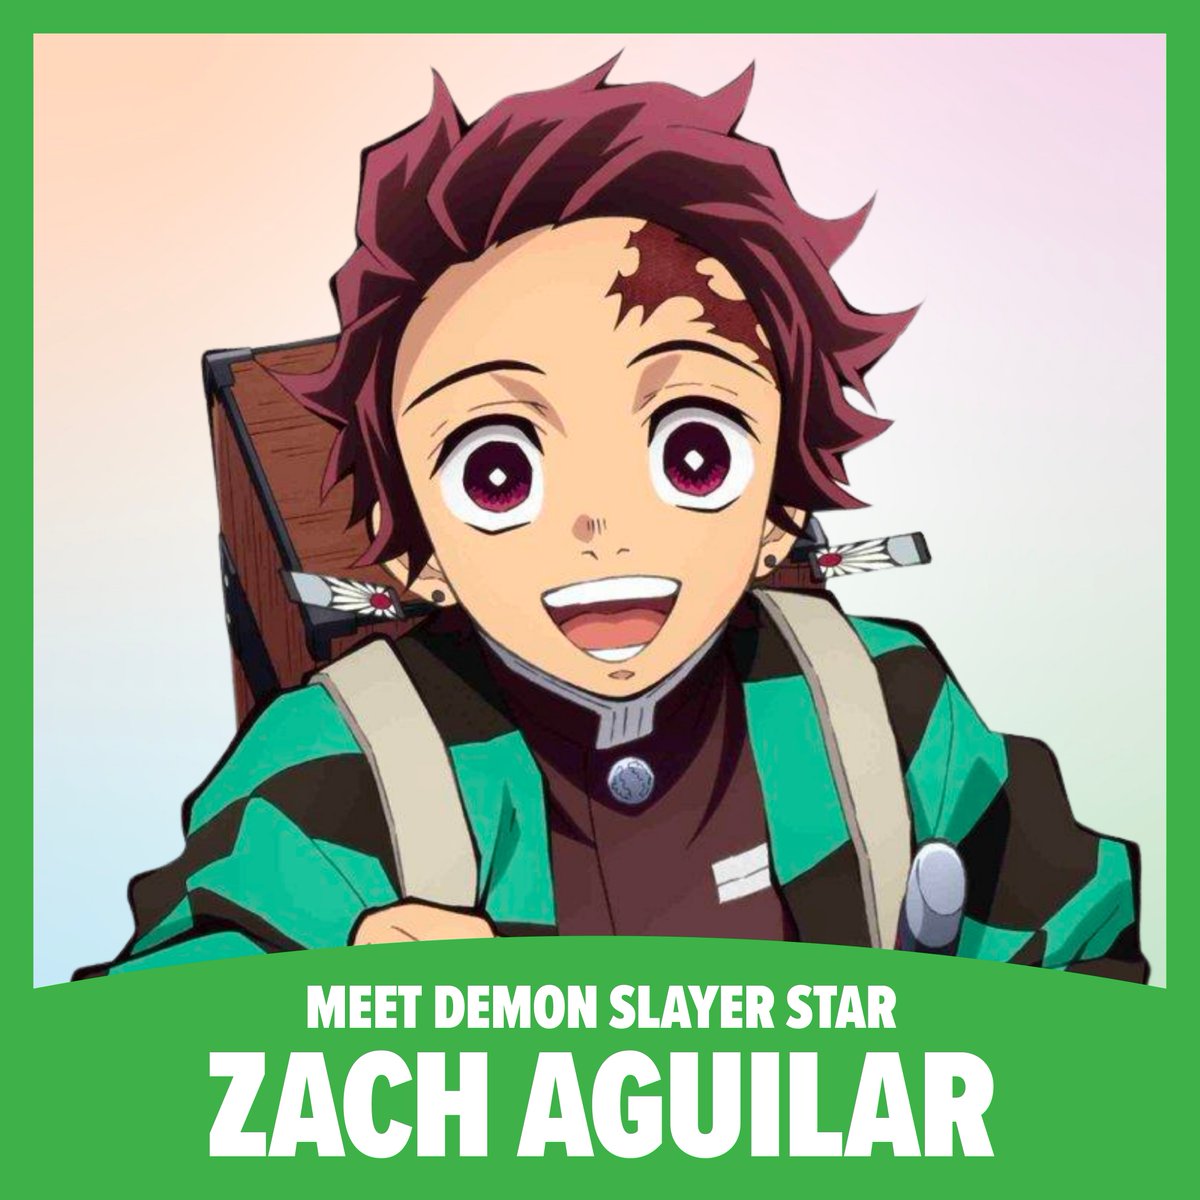 The stars of your fave shonen anime are coming to Philadelphia. Meet @ryancoltlevy (Chainsaw Man), @SarahWiedenheft (Chainsaw Man), @justinbriner (My Hero Academia), and @airzach (Demon Slayer) at #FANEXPOPhiladelphia this May. Get your tickets now. spr.ly/6019wfej5